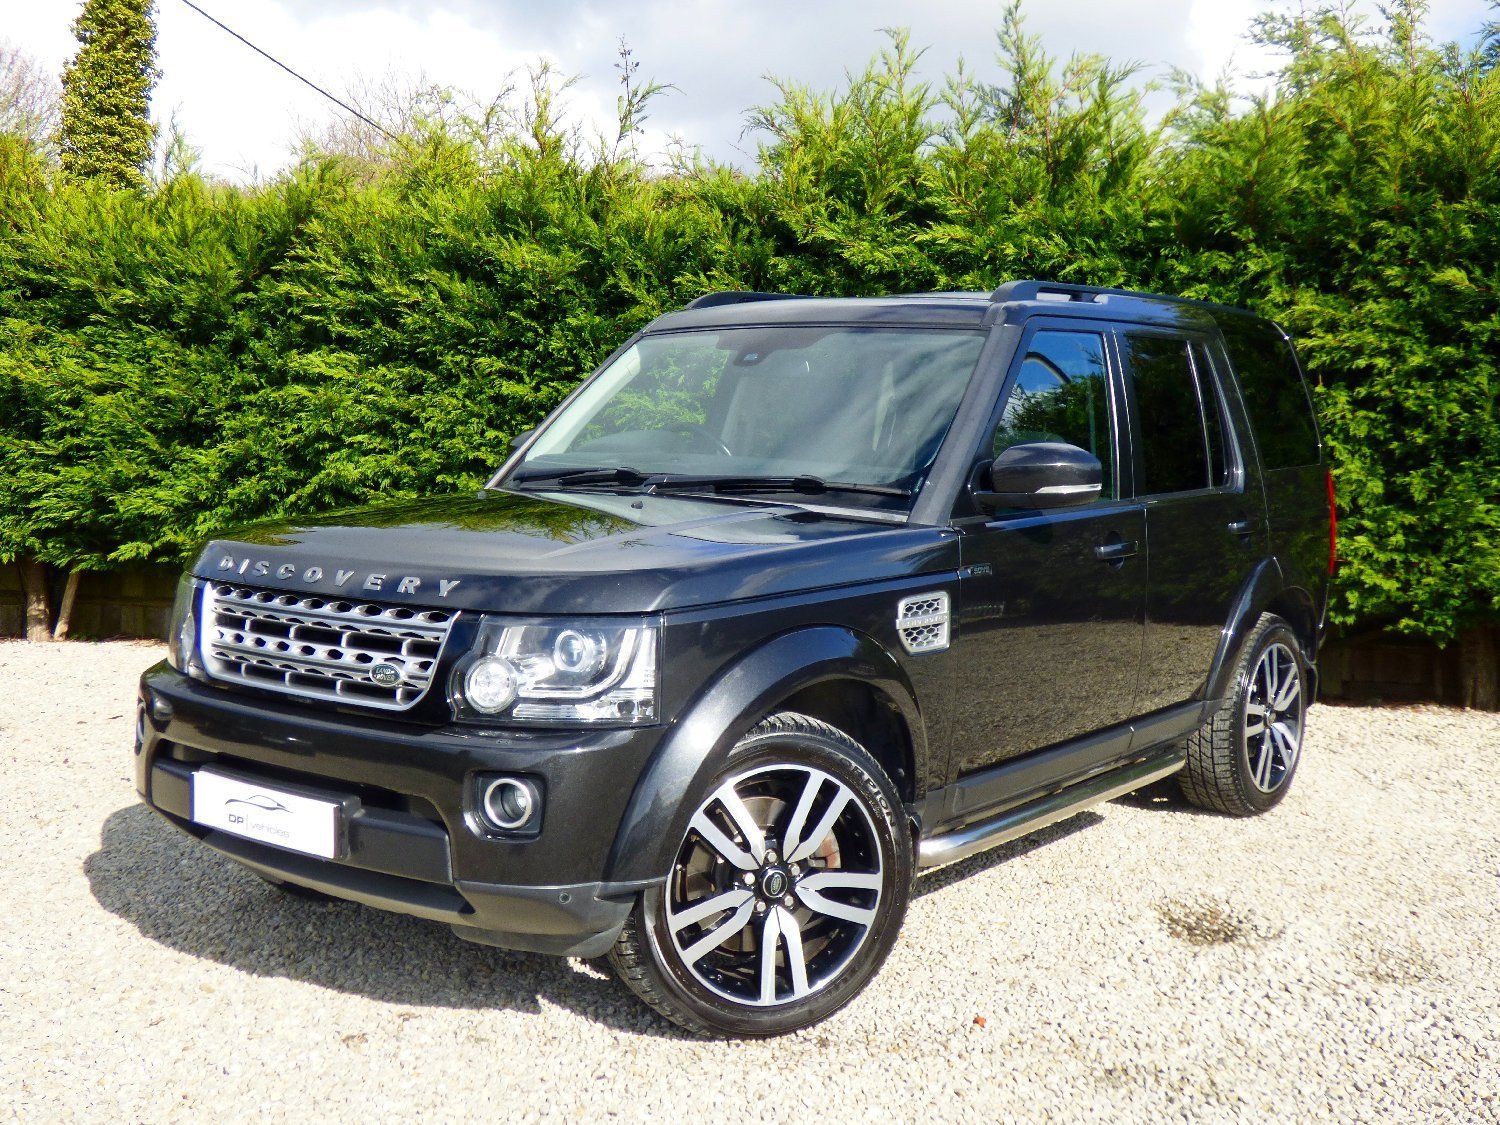 Used LAND ROVER DISCOVERY in Ashford, Kent DP Vehicles